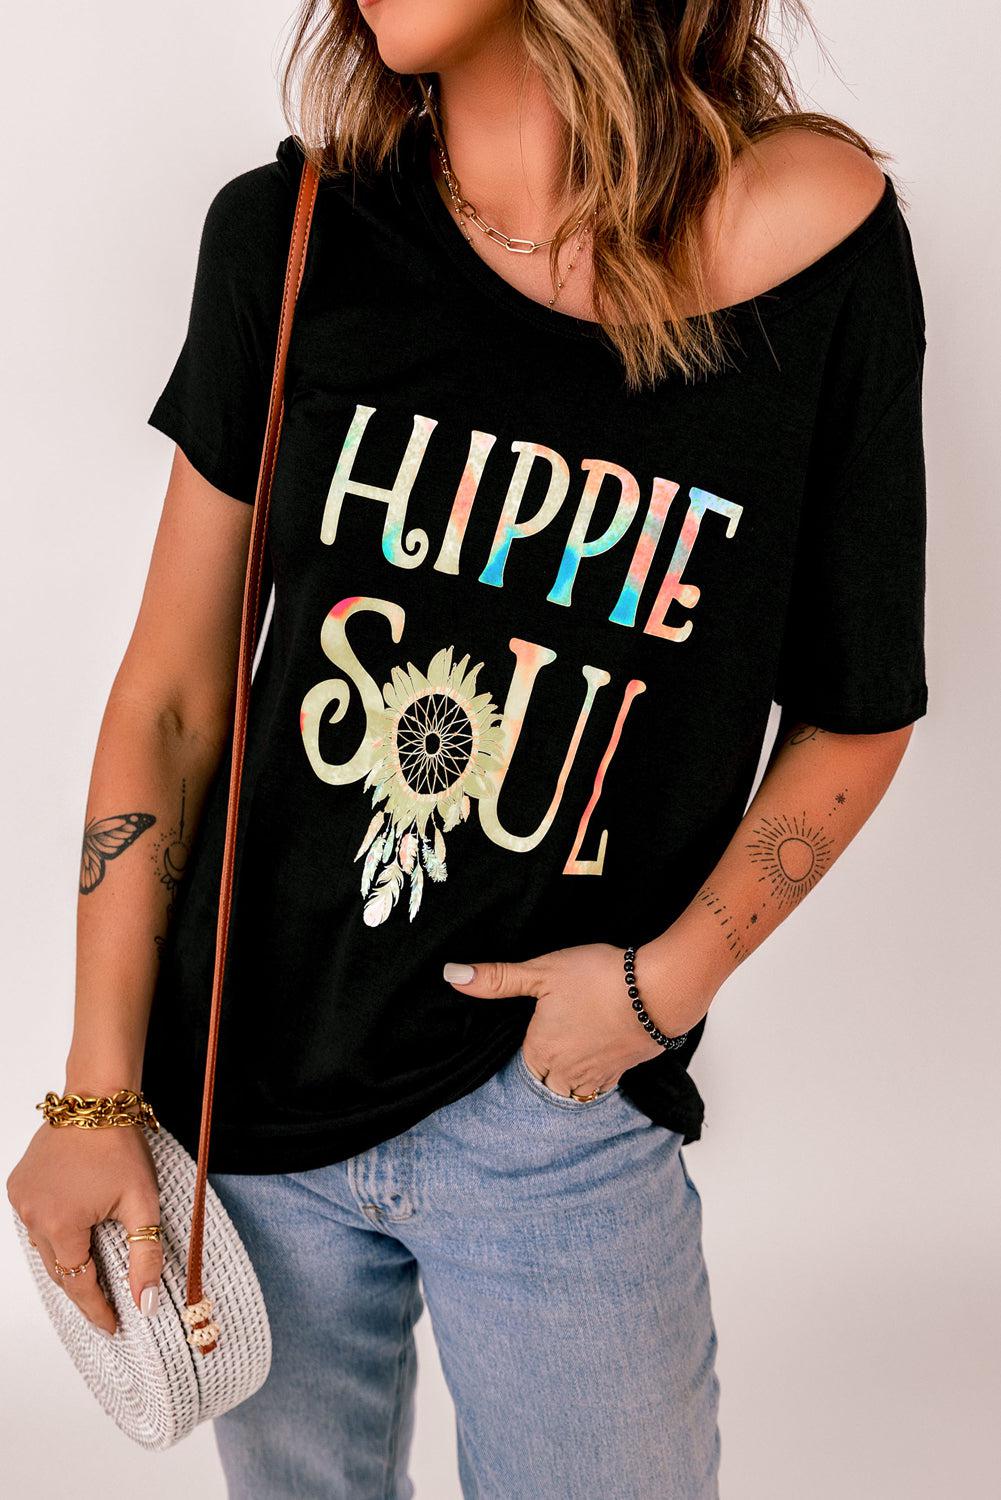 HIPPIE SOUL Graphic Tee BLUE ZONE PLANET